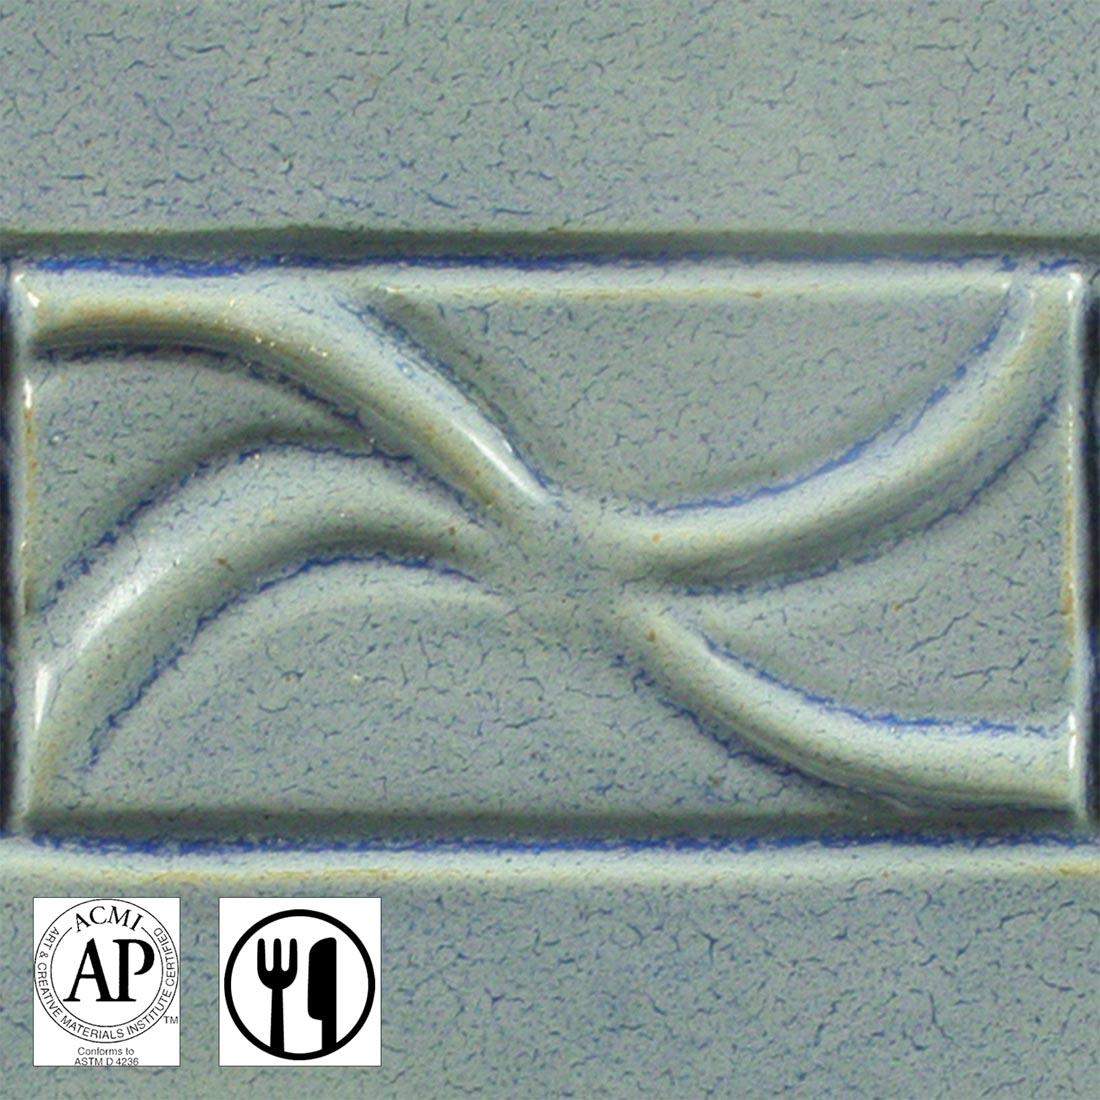 clay tile with Frosted Turquoise AMACO Potter's Choice High Fire Glaze applied; symbols for AP Seal and food safe